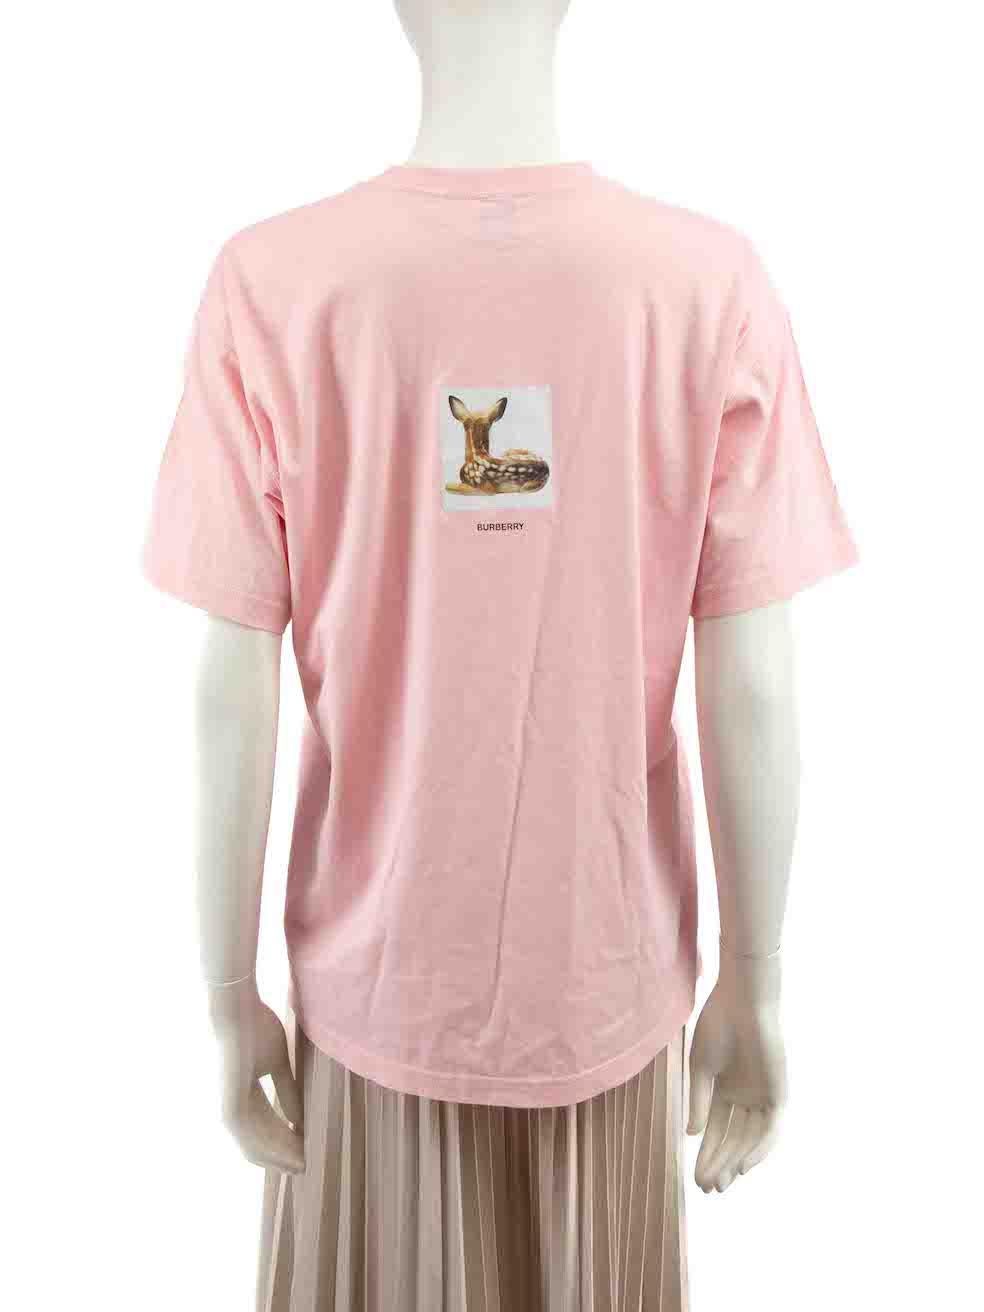 Burberry Pink Bambi Printed Graphic T-Shirt Size S In Excellent Condition For Sale In London, GB